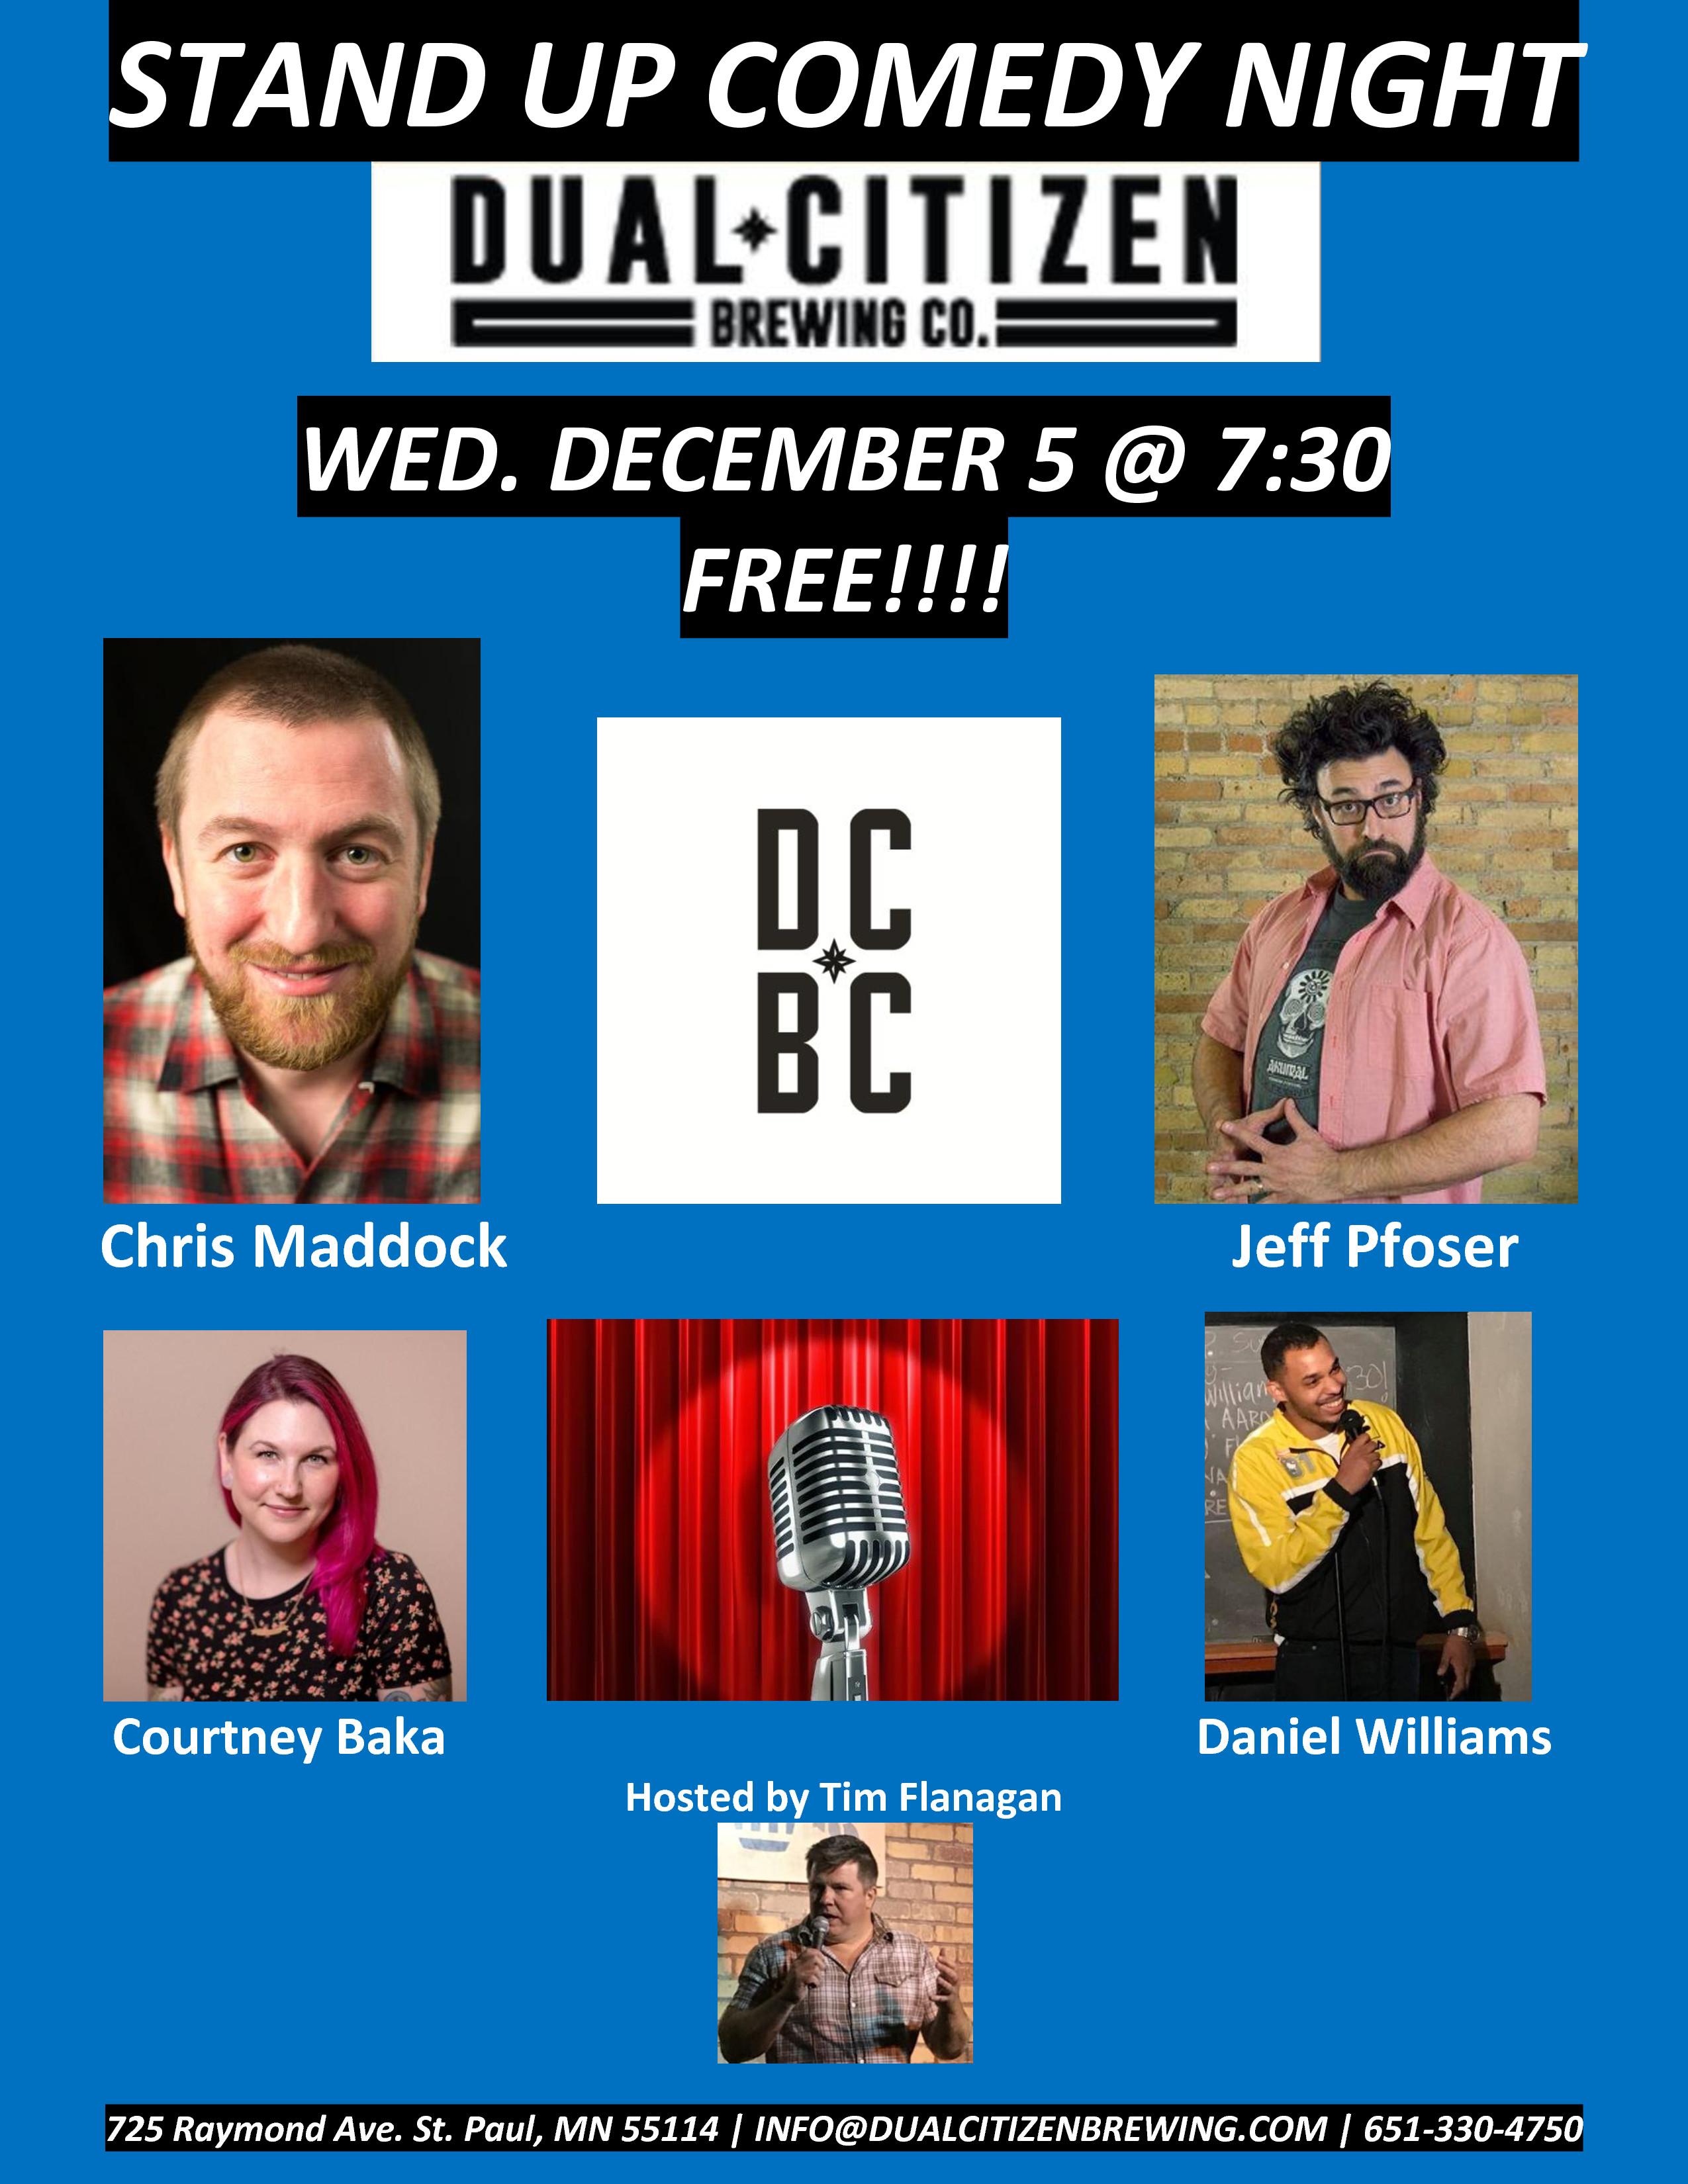 Stand Up Comedy Wednesdays 7:30pm